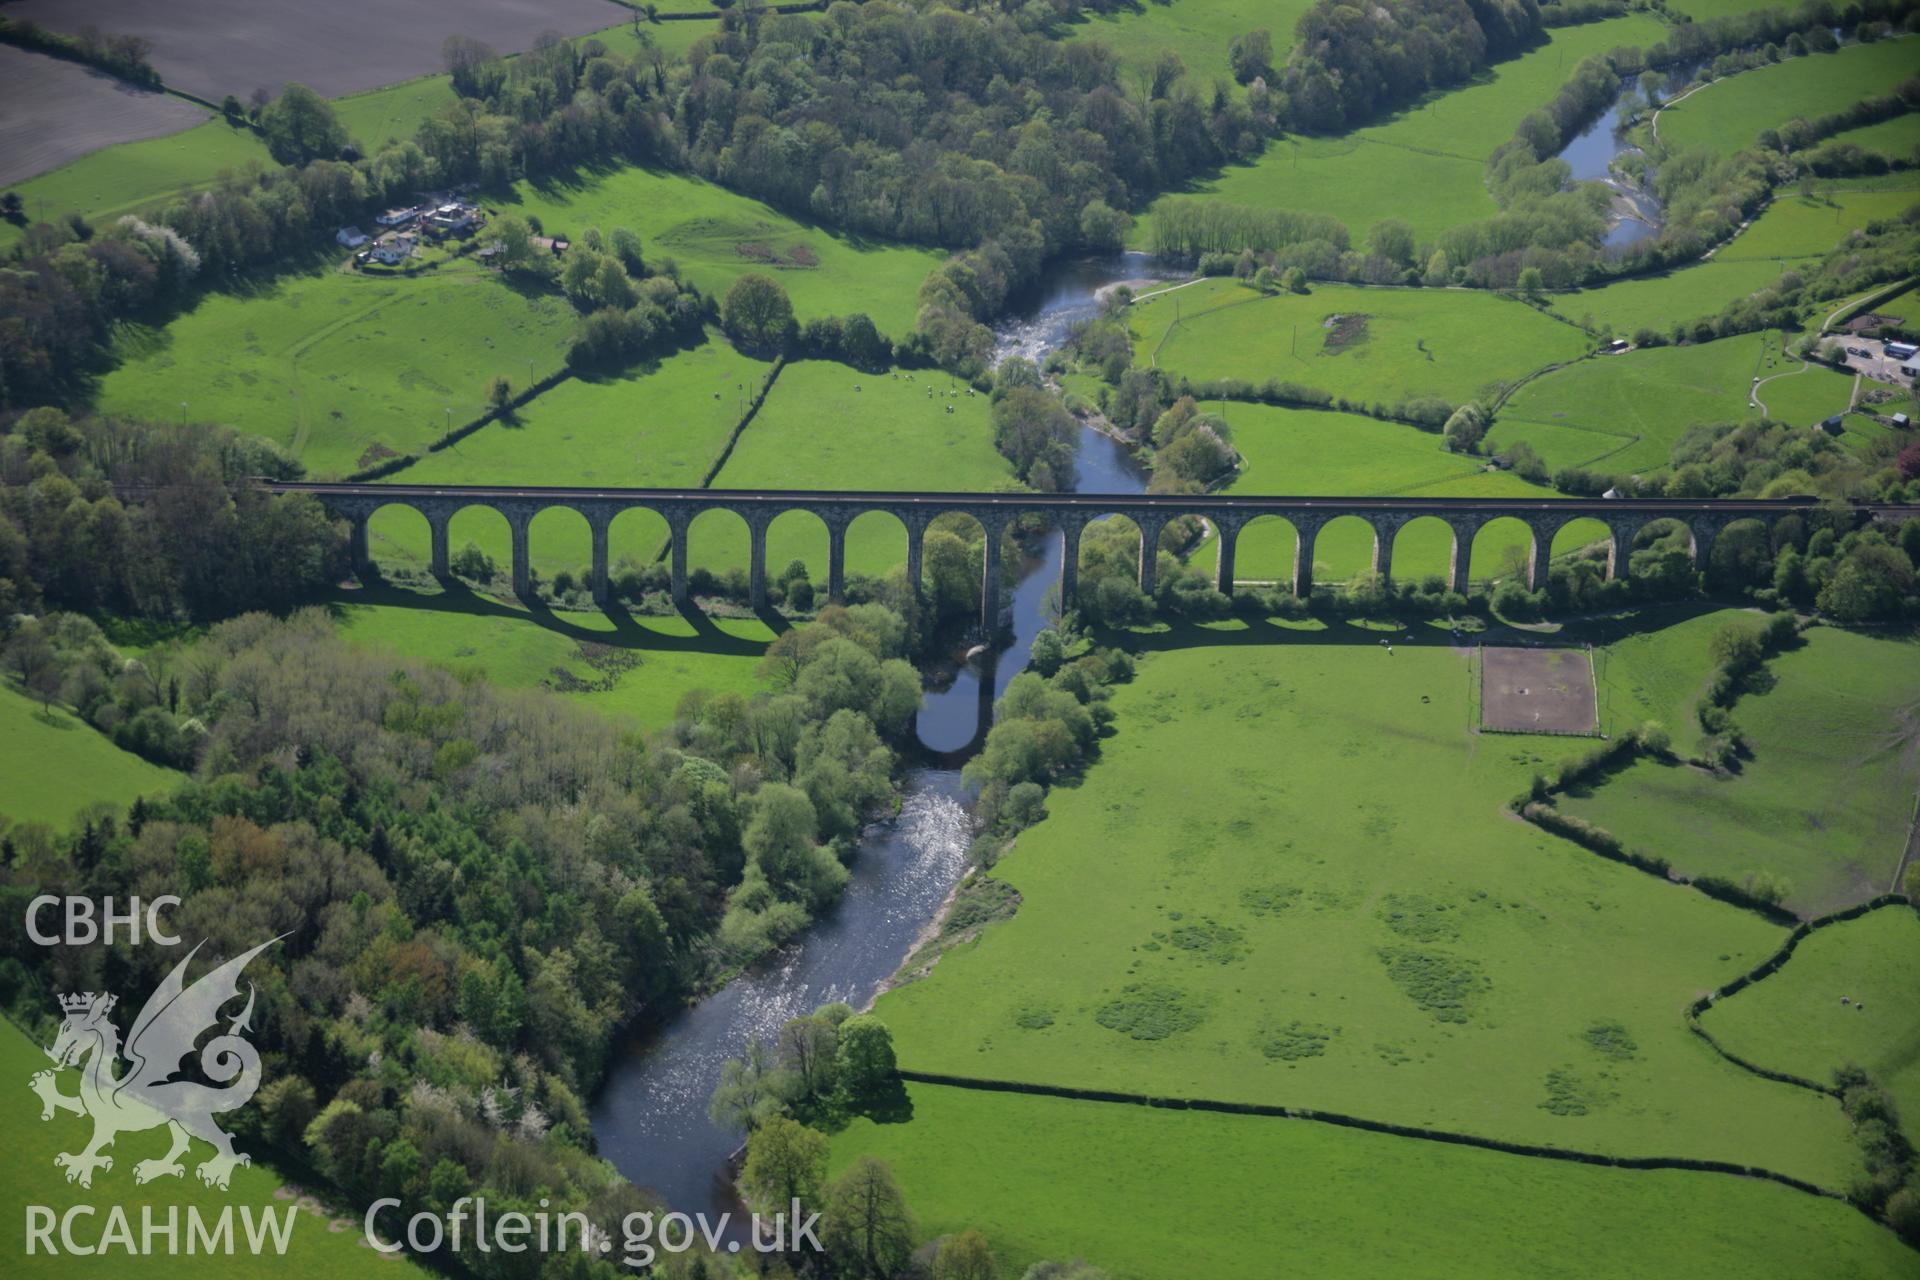 RCAHMW digital colour oblique photograph of Cefn Bychan Viaduct from the east. Taken on 05/05/2006 by T.G. Driver.